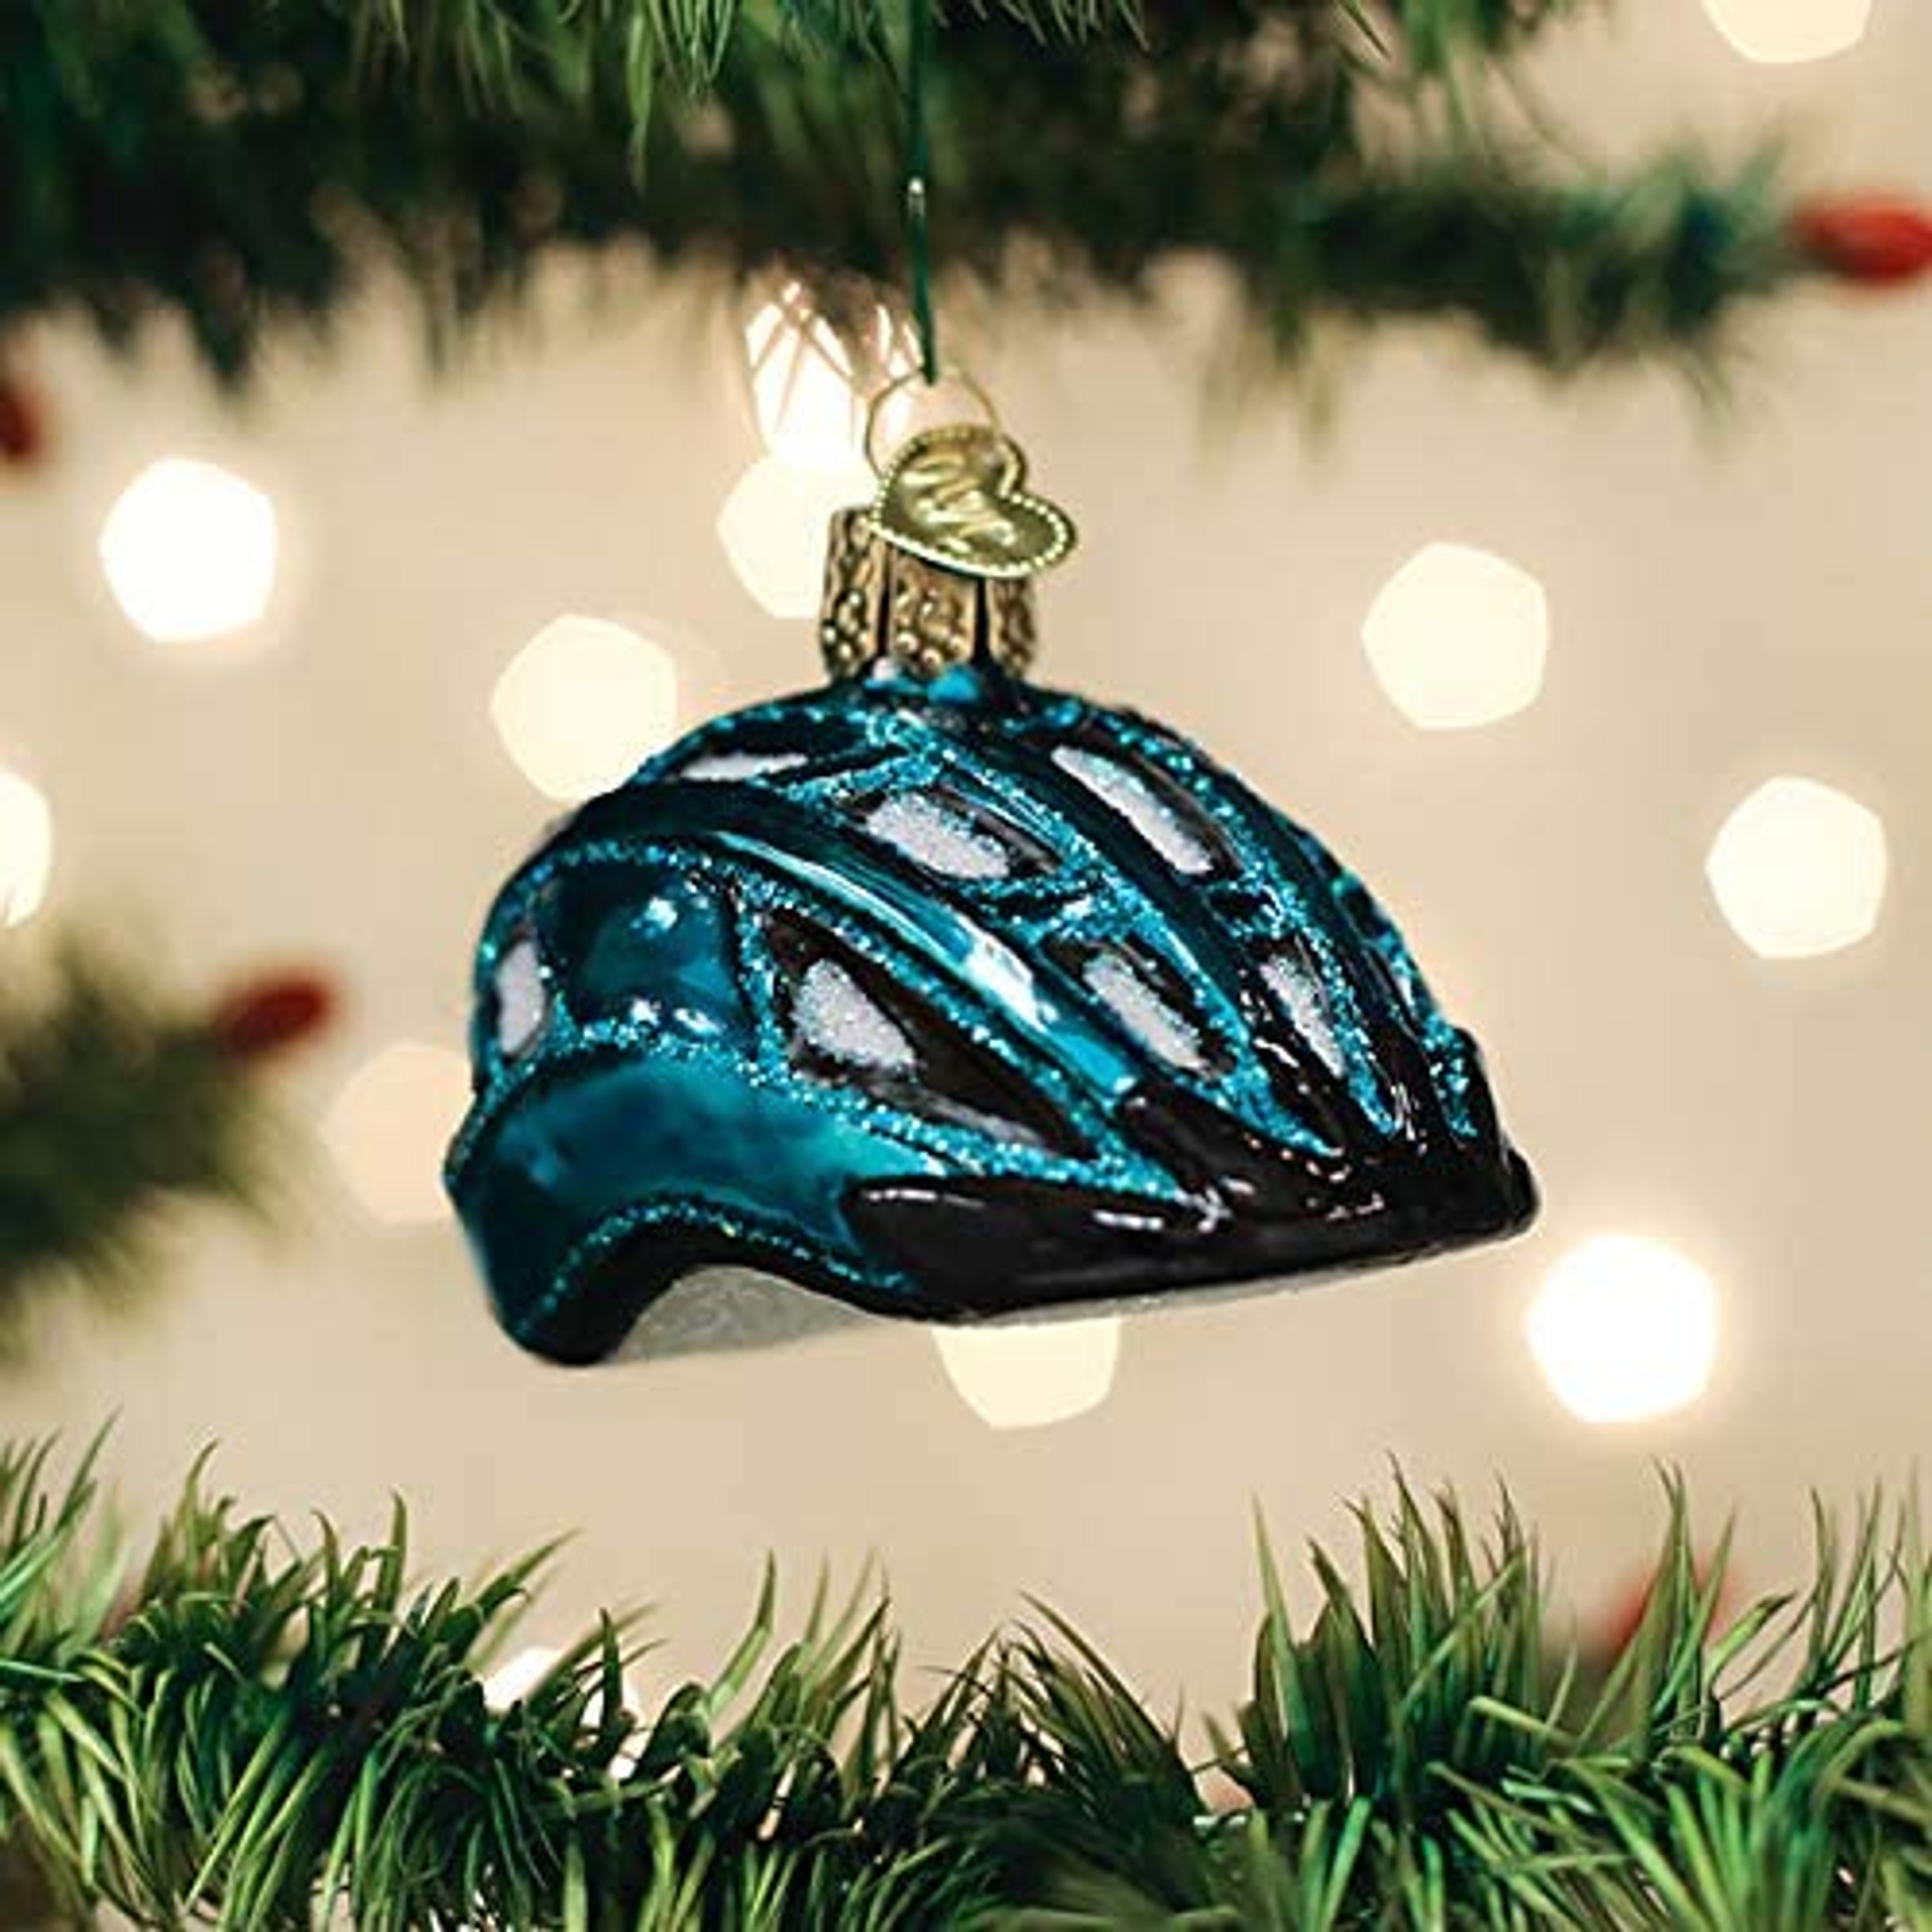 Old World Christmas Glass Blown Ornament for Christmas Tree, Bike Helmet (With OWC Gift Box)